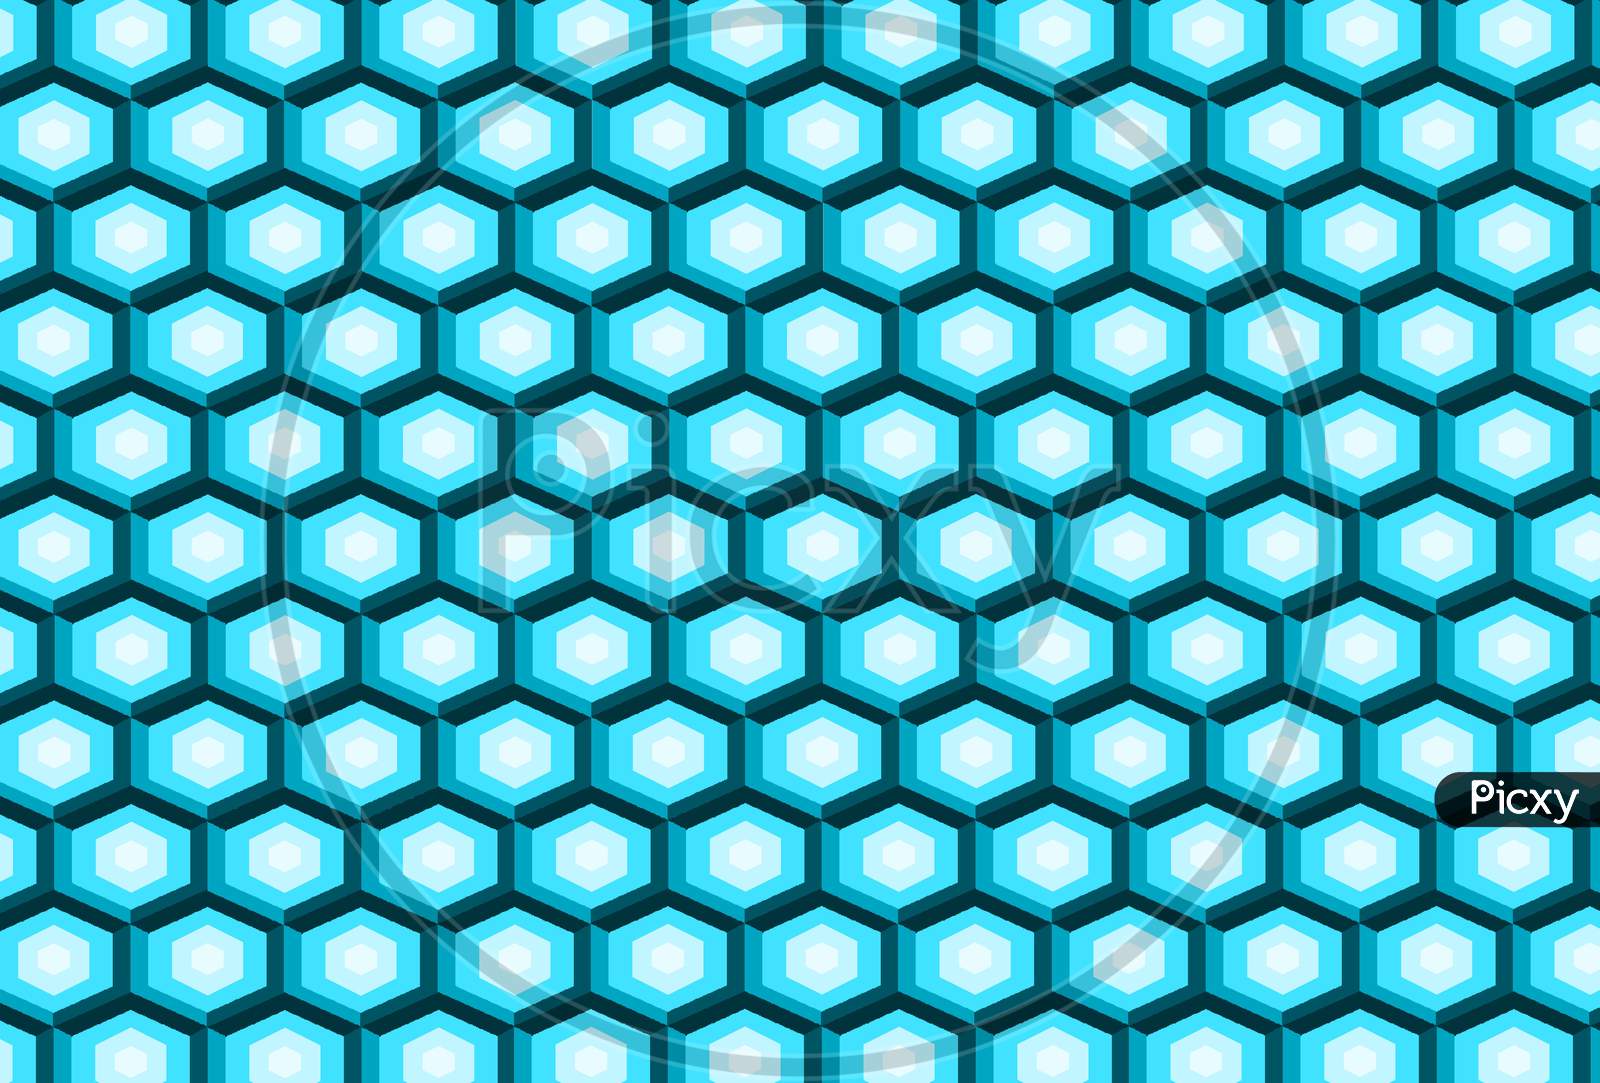 3d hexagon illustration grid pattern with triangle border. Abstract 3d rendering background of futuristic surface with hexagons. Hexagonal grid background with modern style texture.